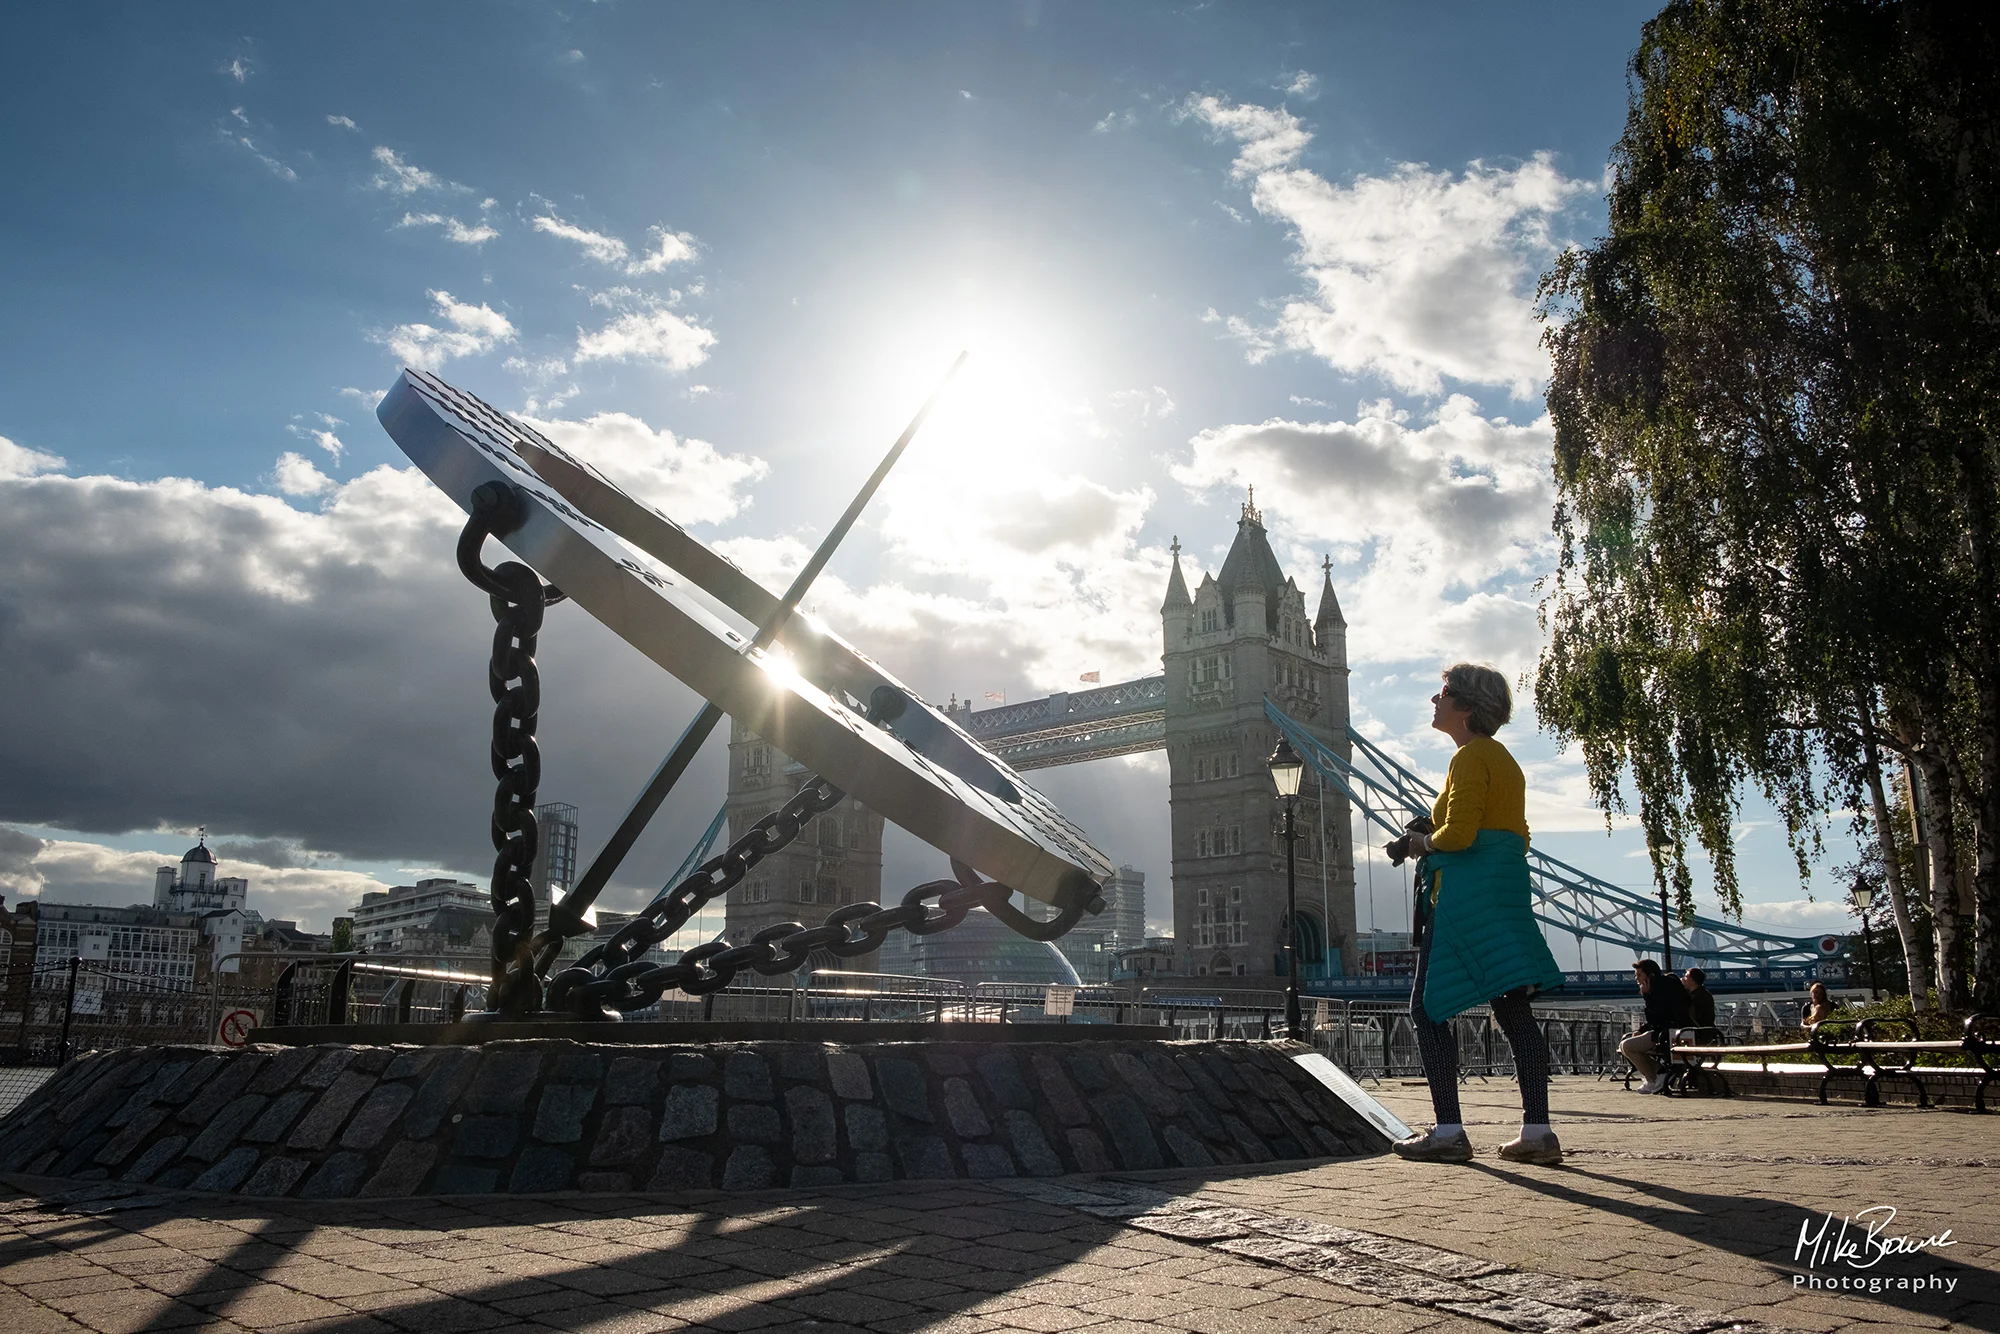 The Timepiece Sundial sculpture at the foot of Tower Bridge with woman